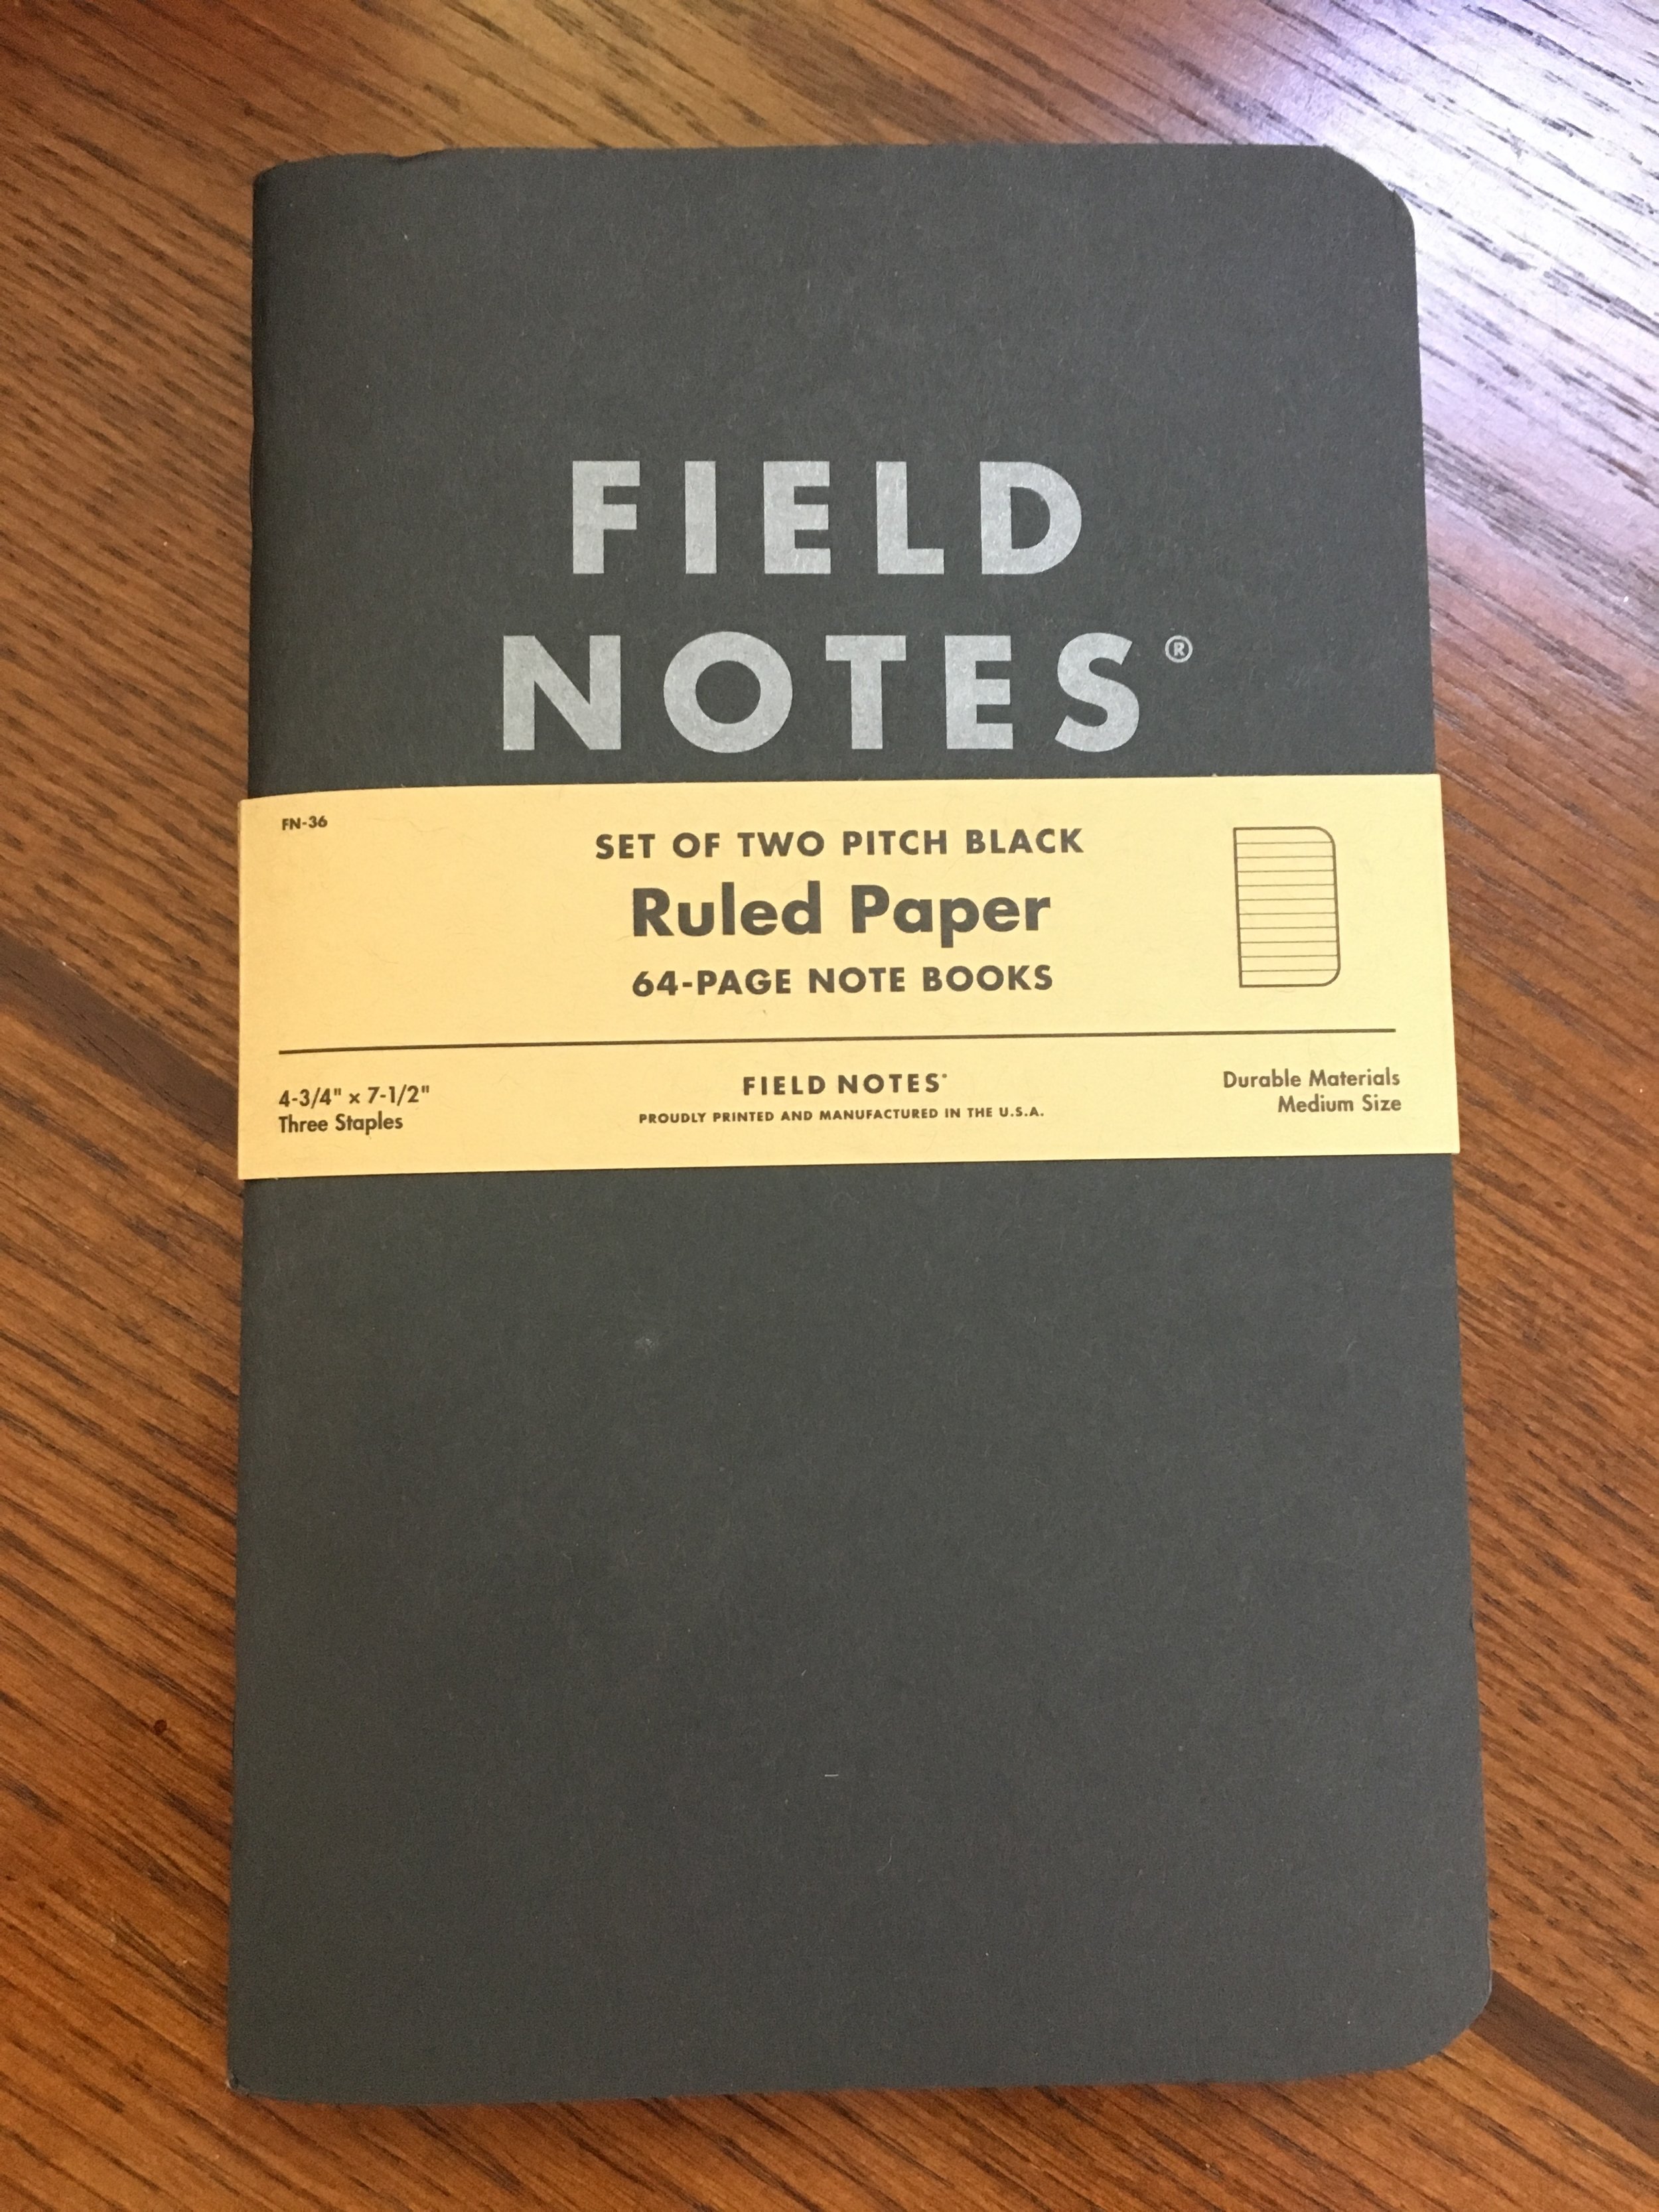 Field Notes Pitch Black Note Books Review — The Pen Addict